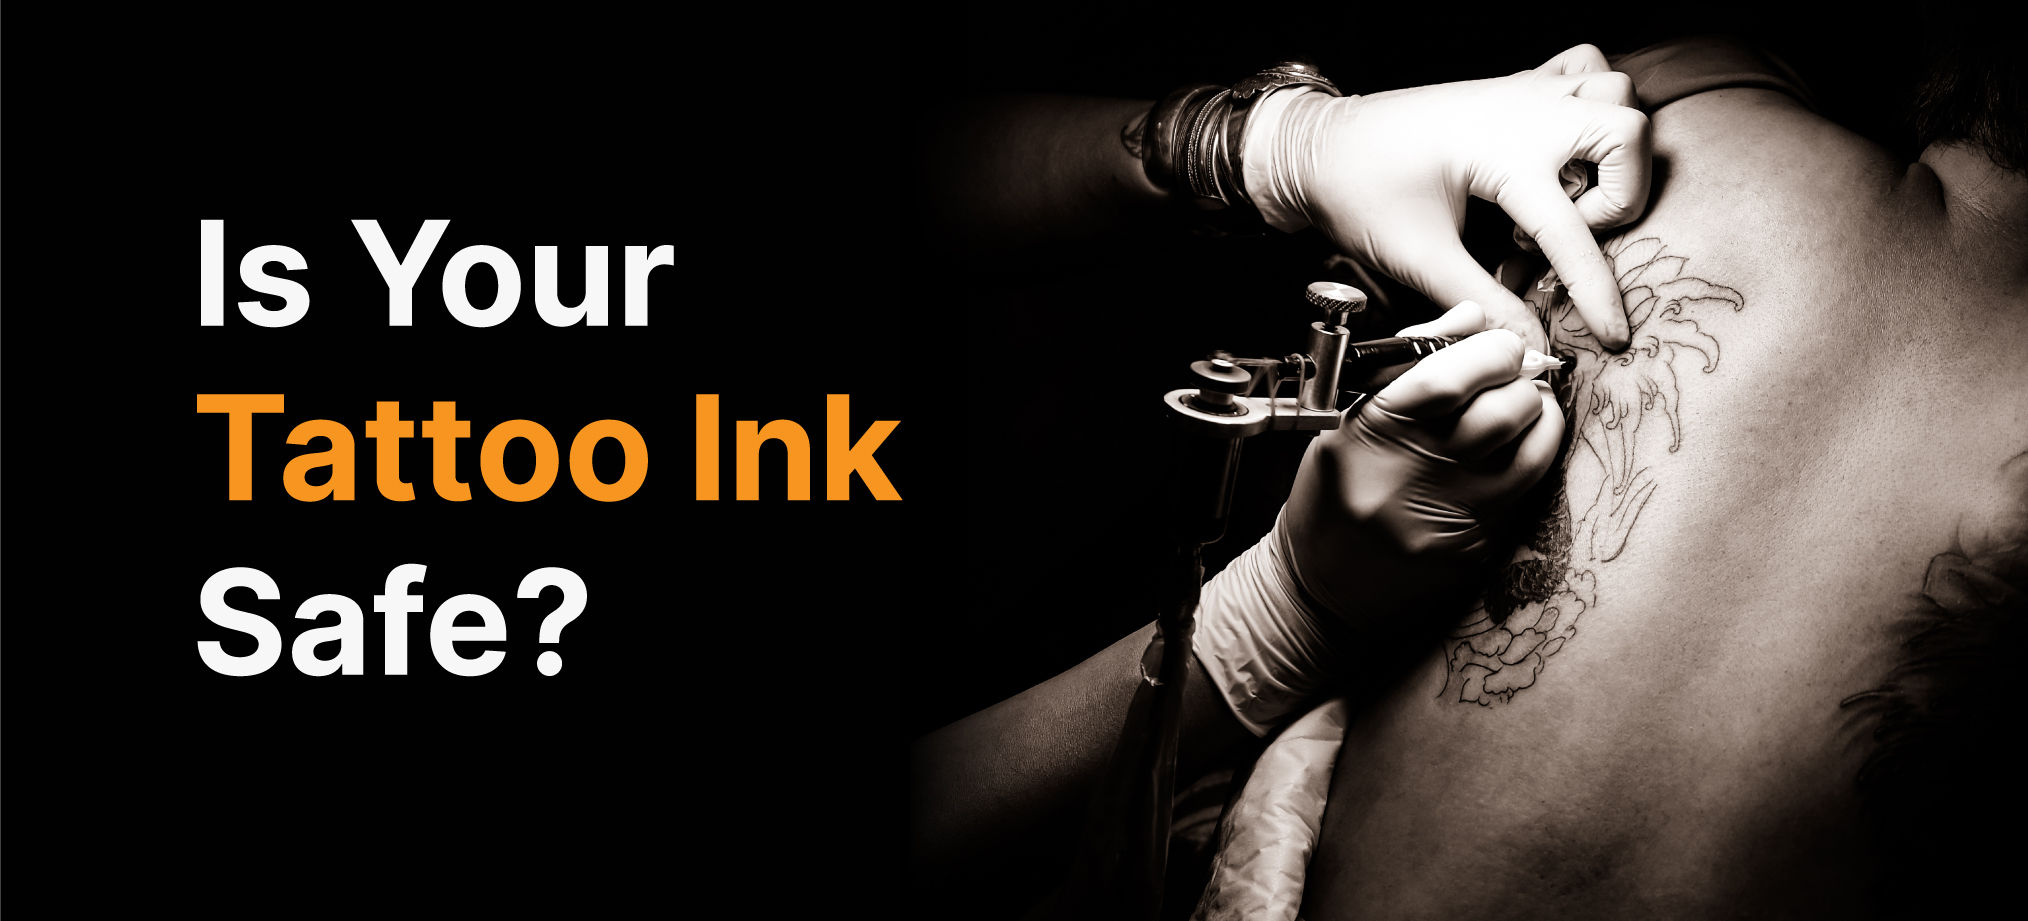 Is your tattoo ink safe? Things You Should Know Before Getting Inked